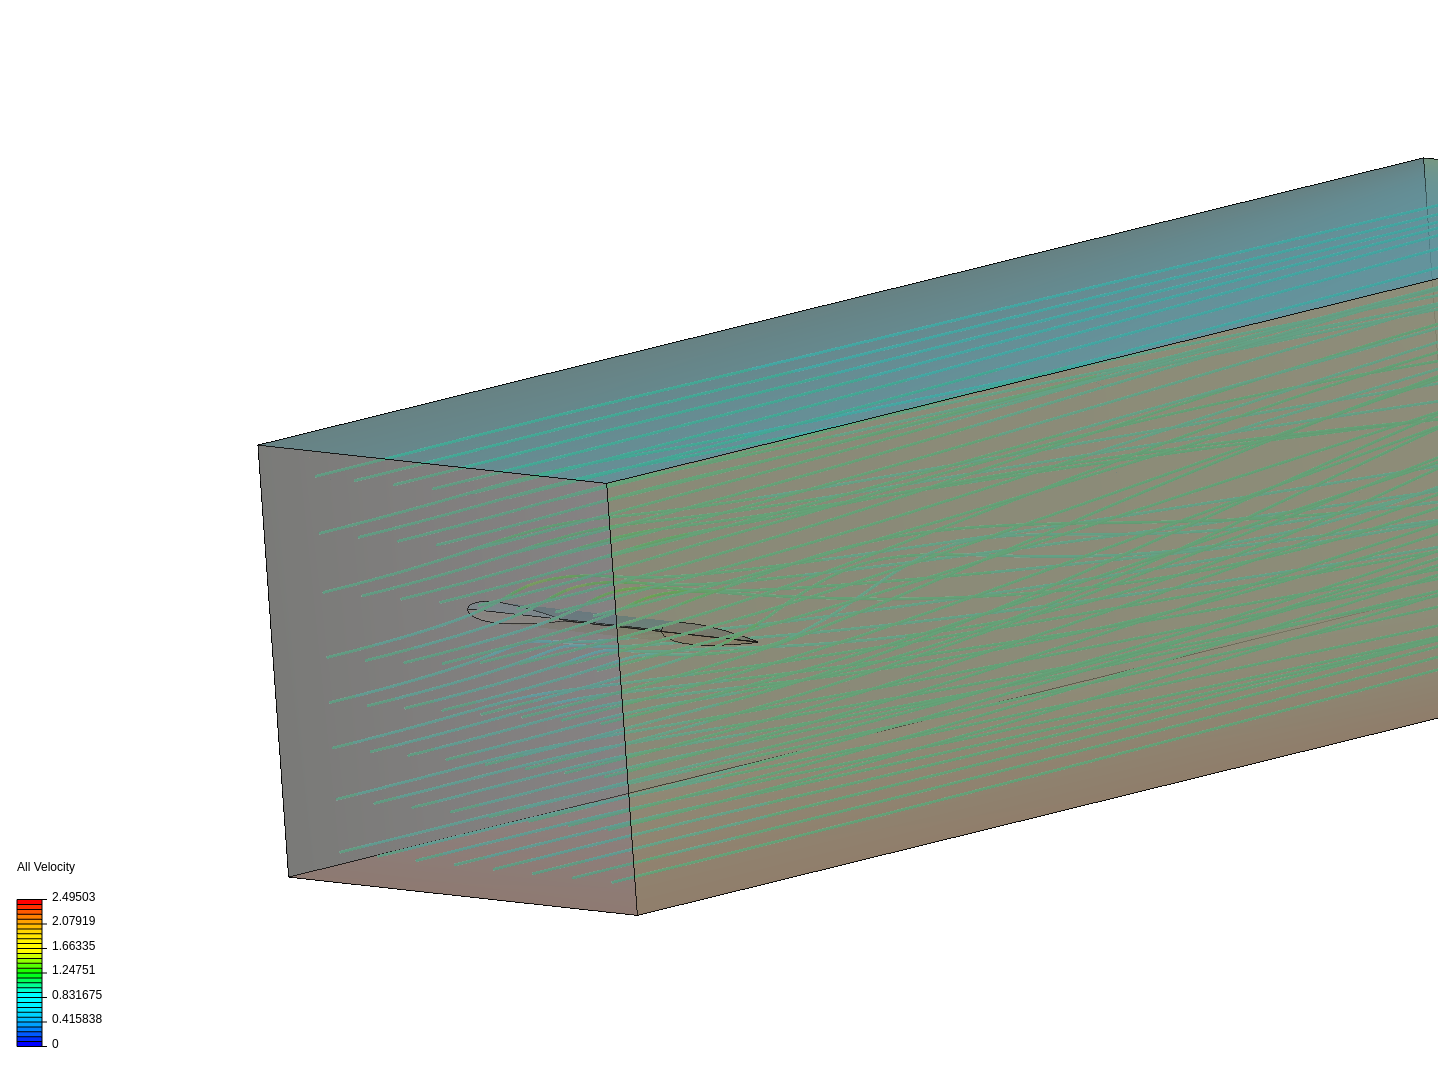 winglet cfd image